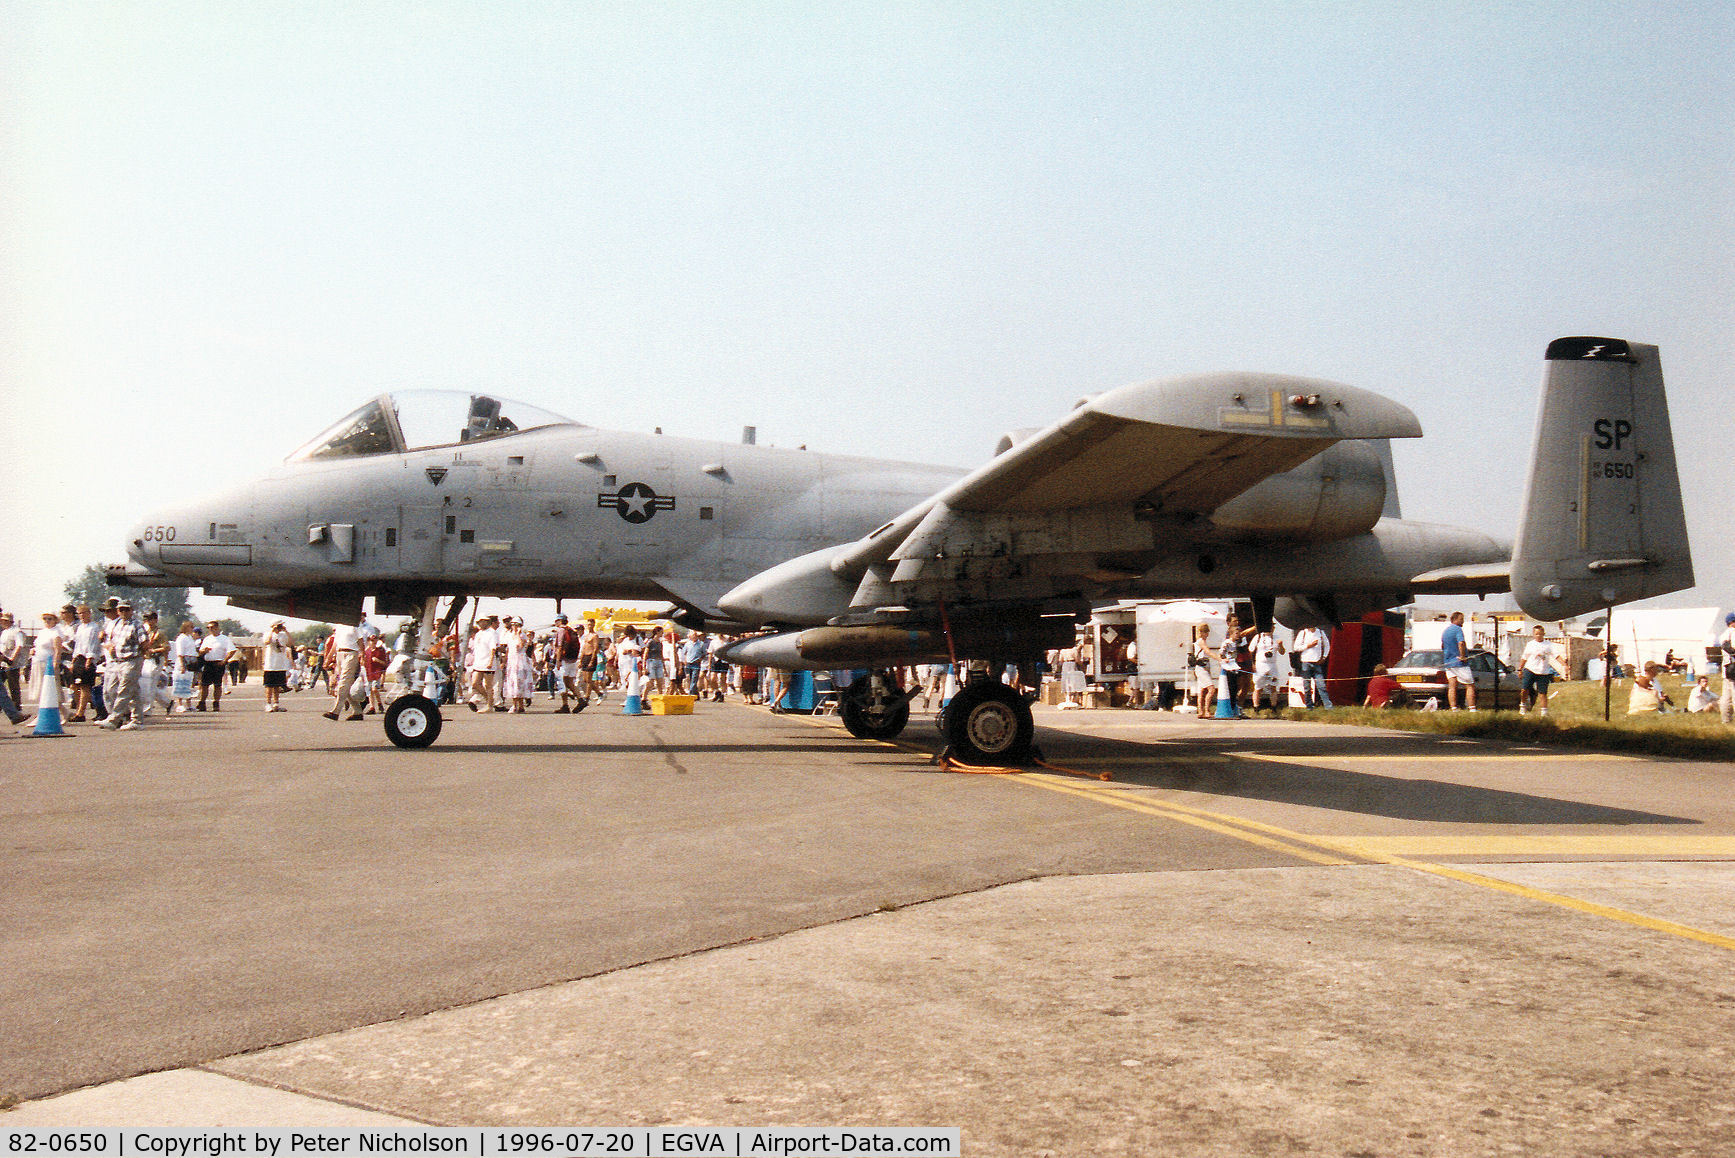 82-0650, 1980 Fairchild Republic A-10A Thunderbolt II C/N A10-0698, A-10A Thunderbolt of Spangdahlem's 81st Fighter Squadron/52nd Fighter Wing on display at the 1996 Royal Intnl Air Tattoo at RAF Fairford.